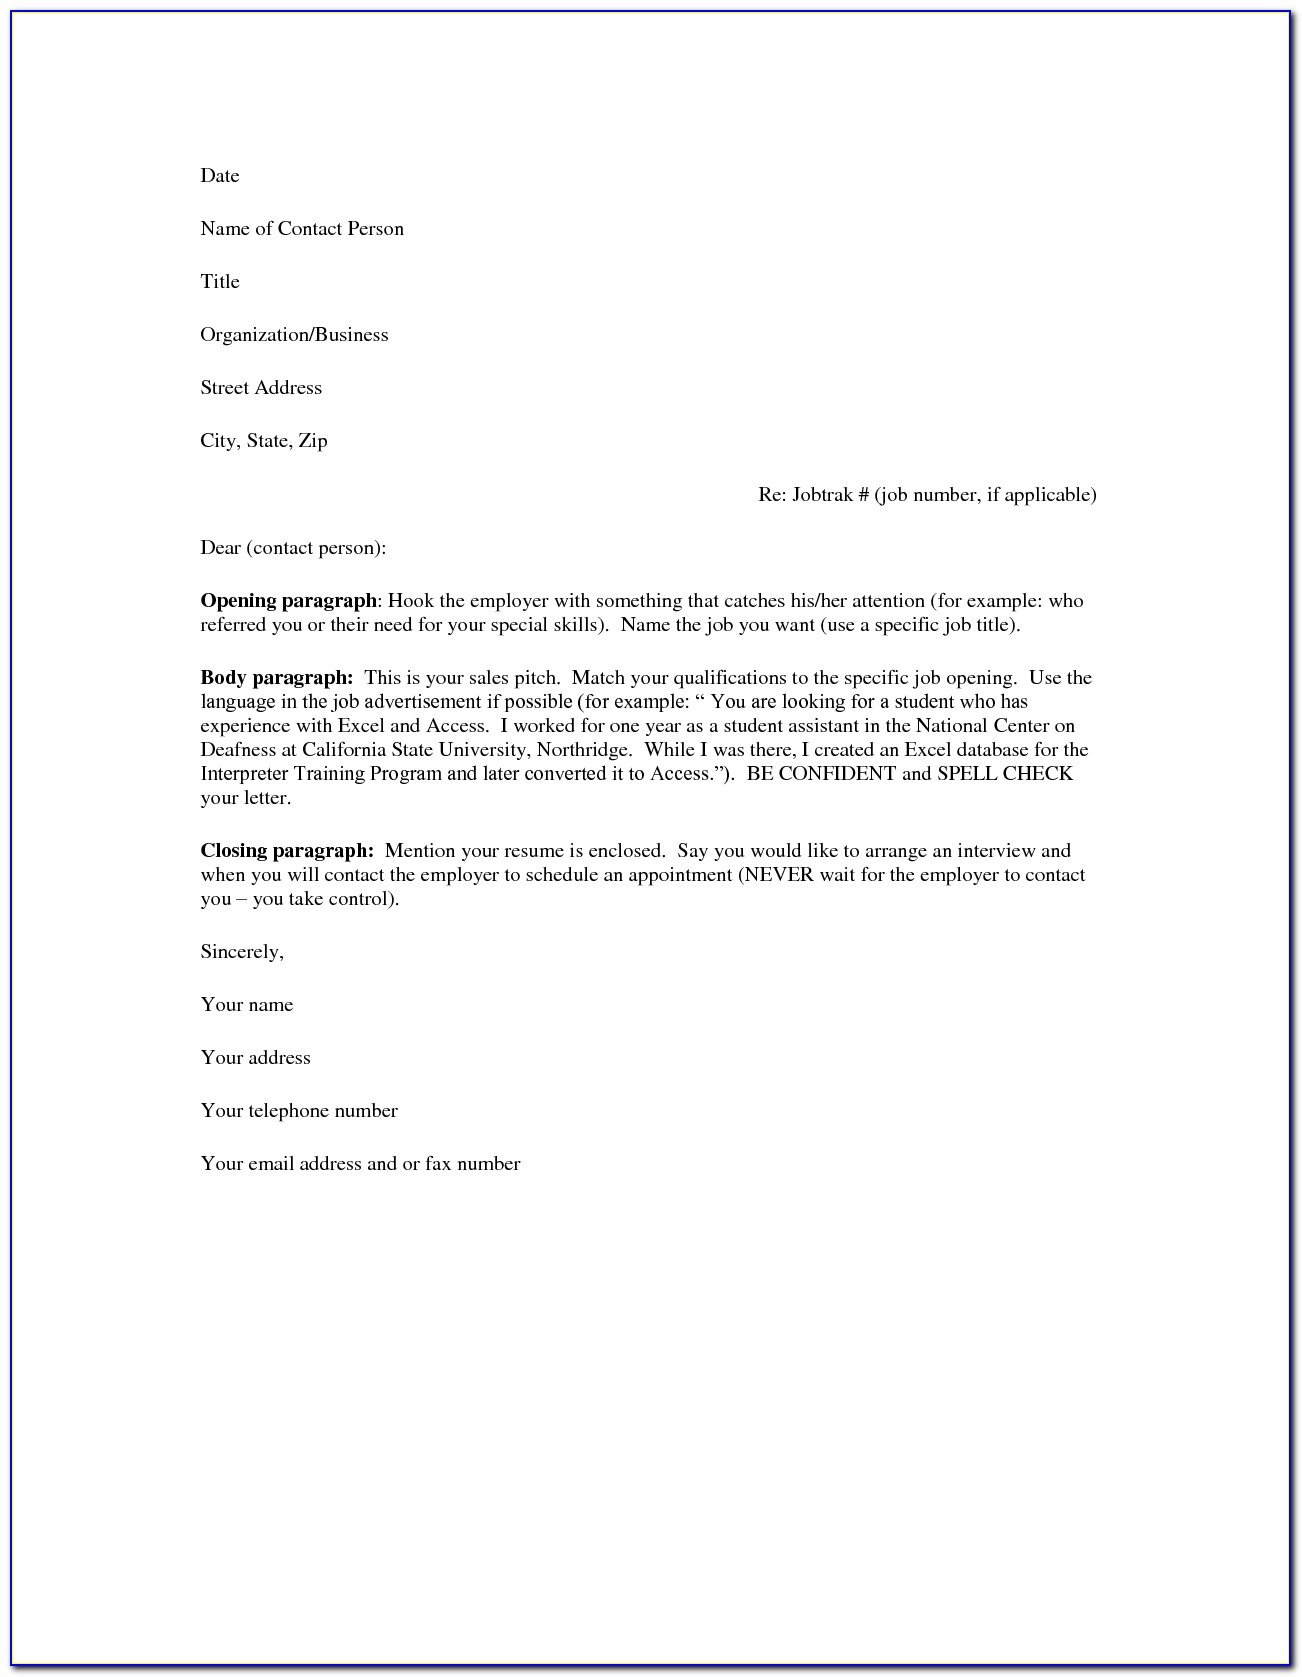 Samples Of Cover Letters For Resumes